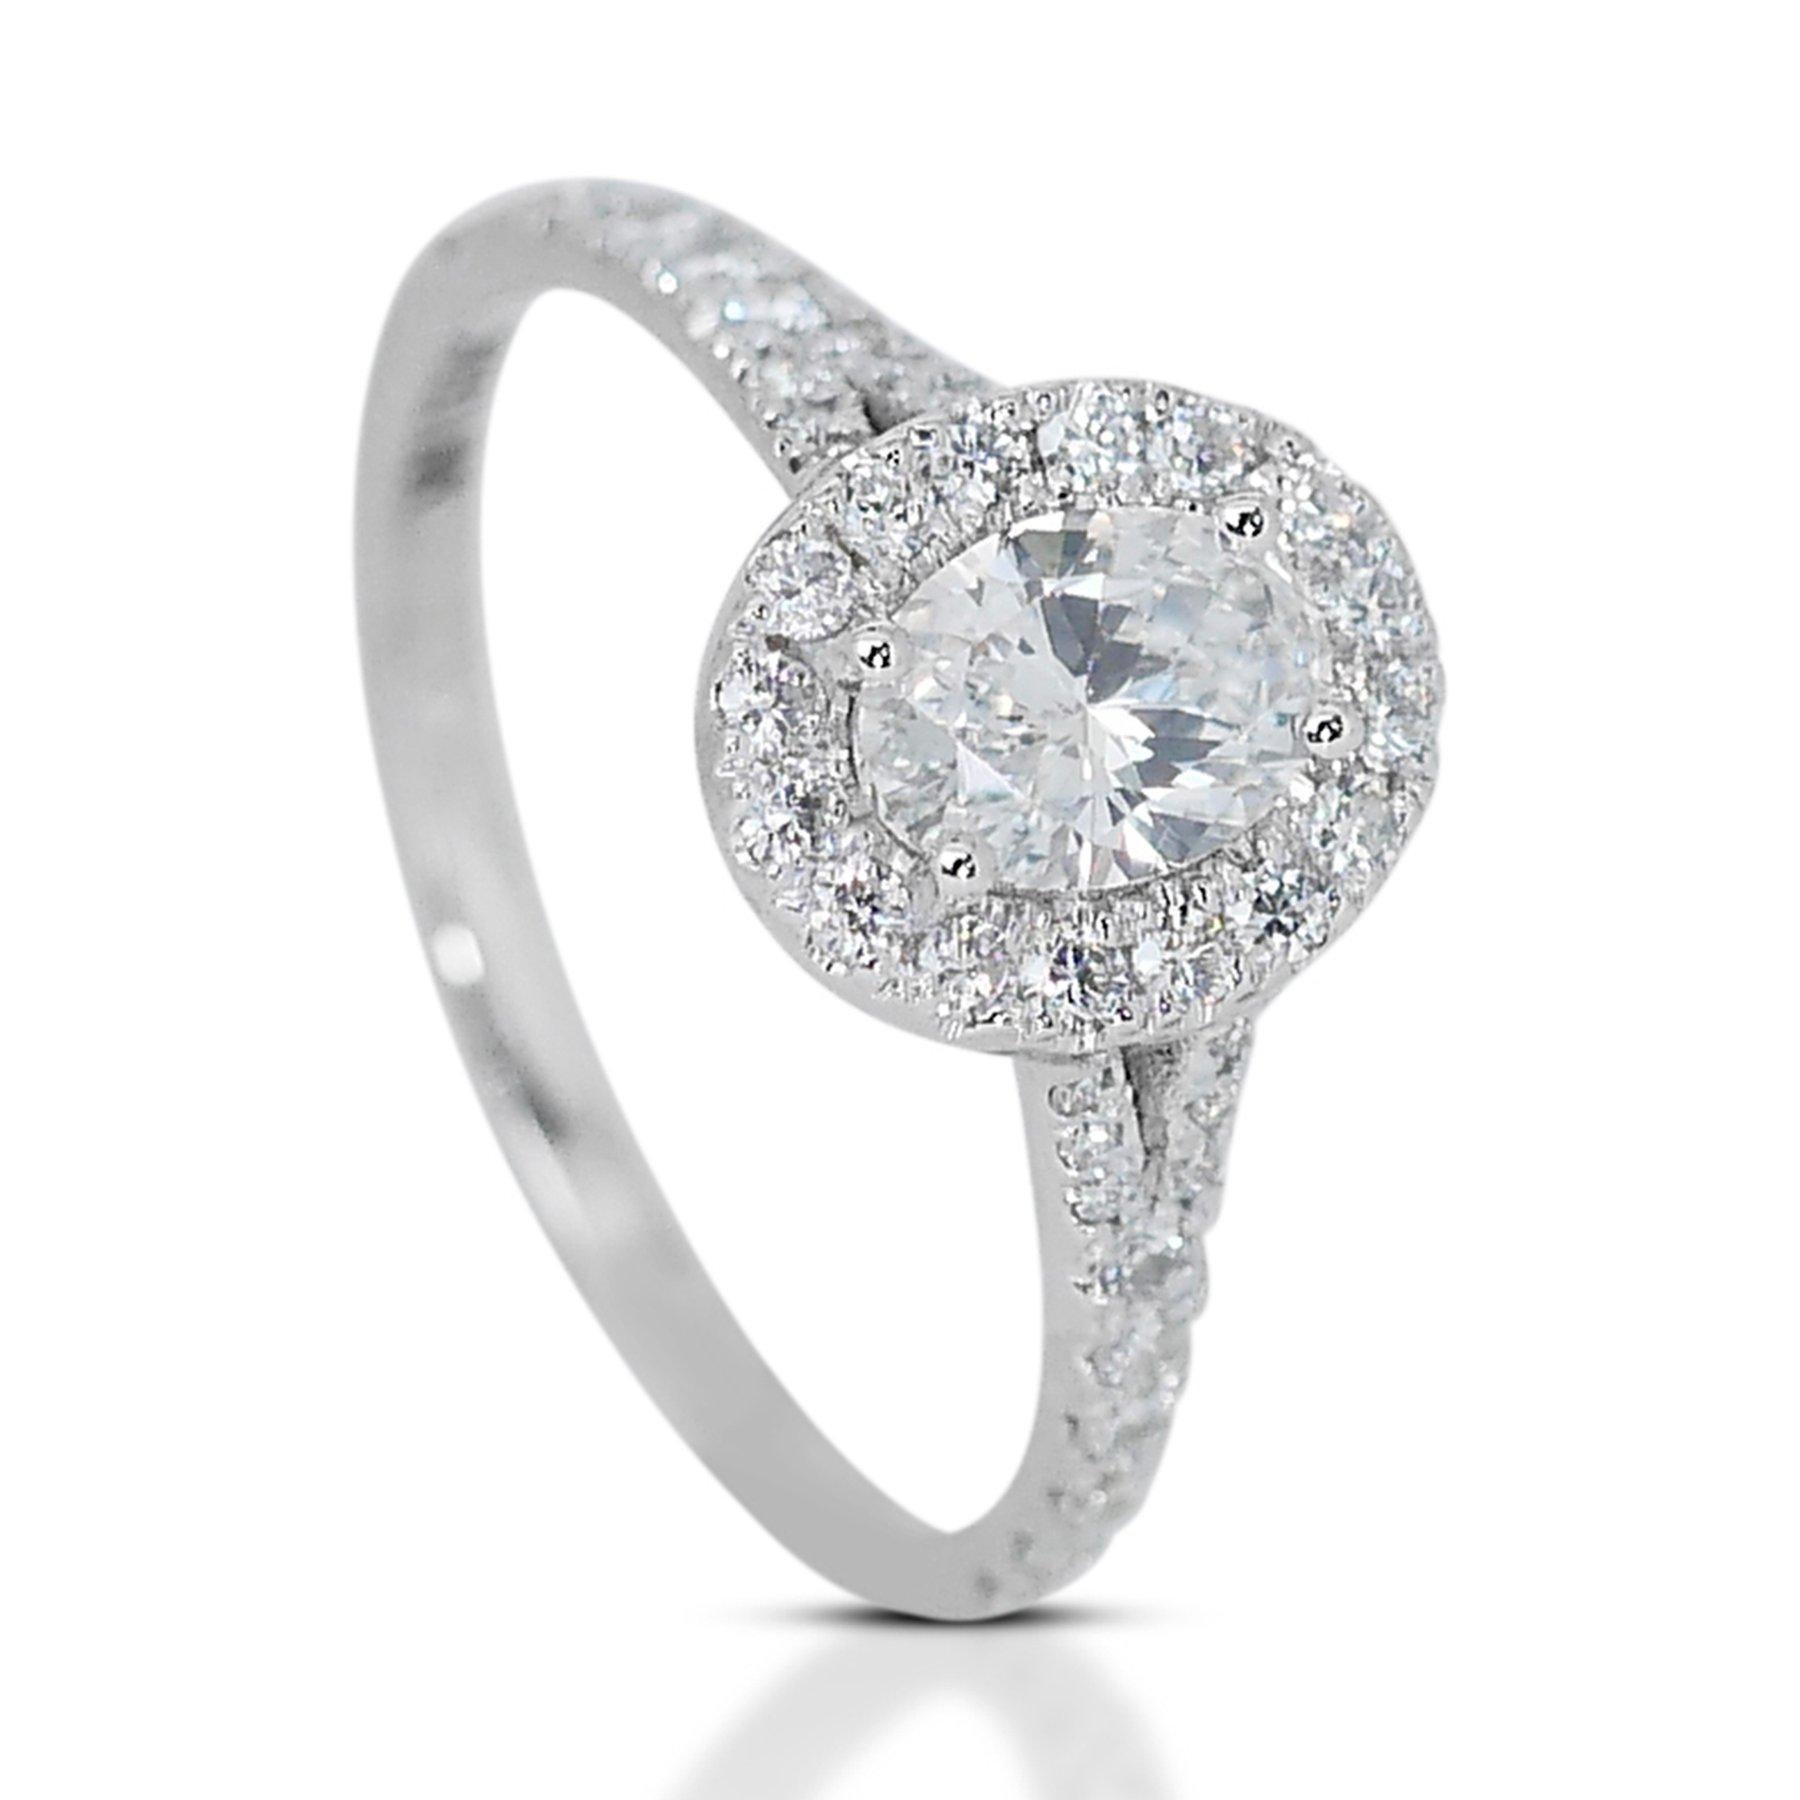 Exquisite 1.04ct Oval Diamond Halo Ring in 18k White Gold - GIA Certified

Experience the allure of refined luxury with this exquisite 18k white gold diamond ring, featuring a central oval-shaped diamond that weighs 1.00-carat. Accompanying the